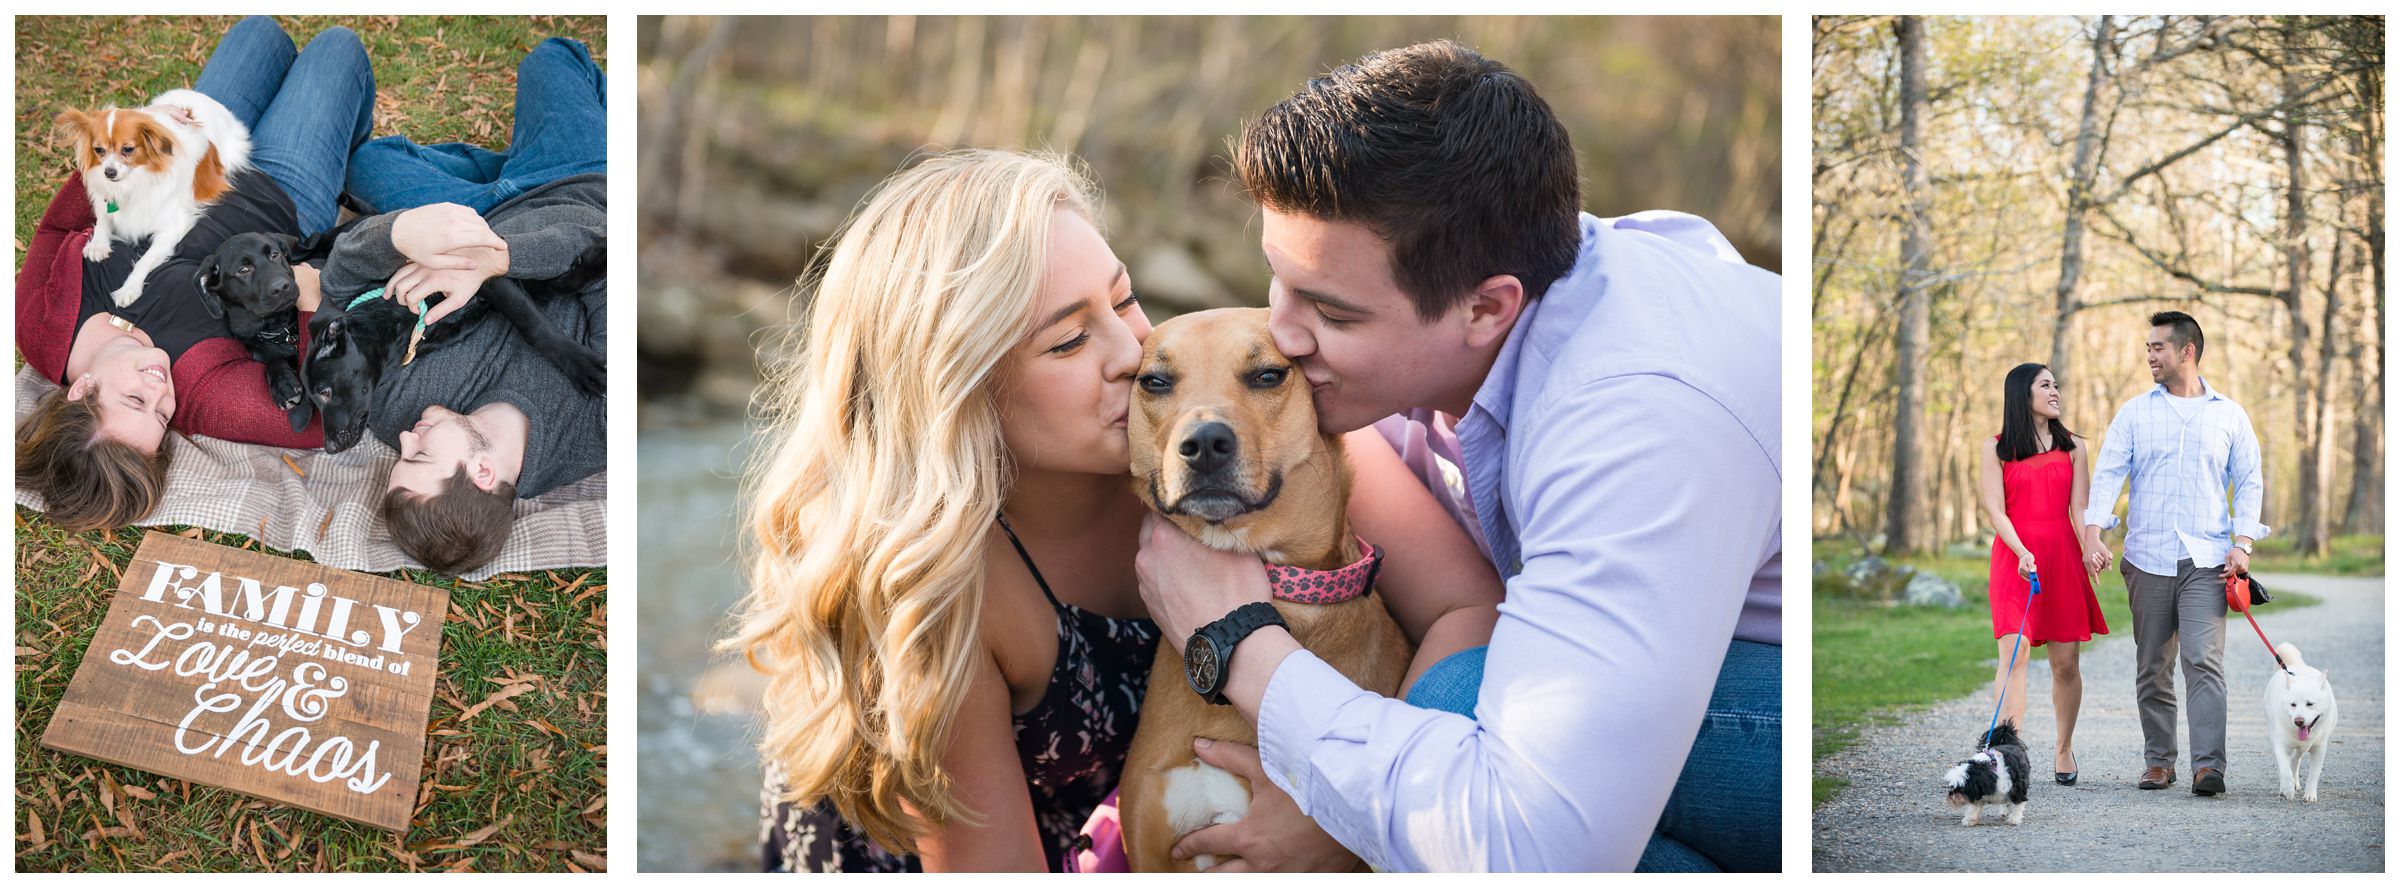 bringing your dog to your engagement session